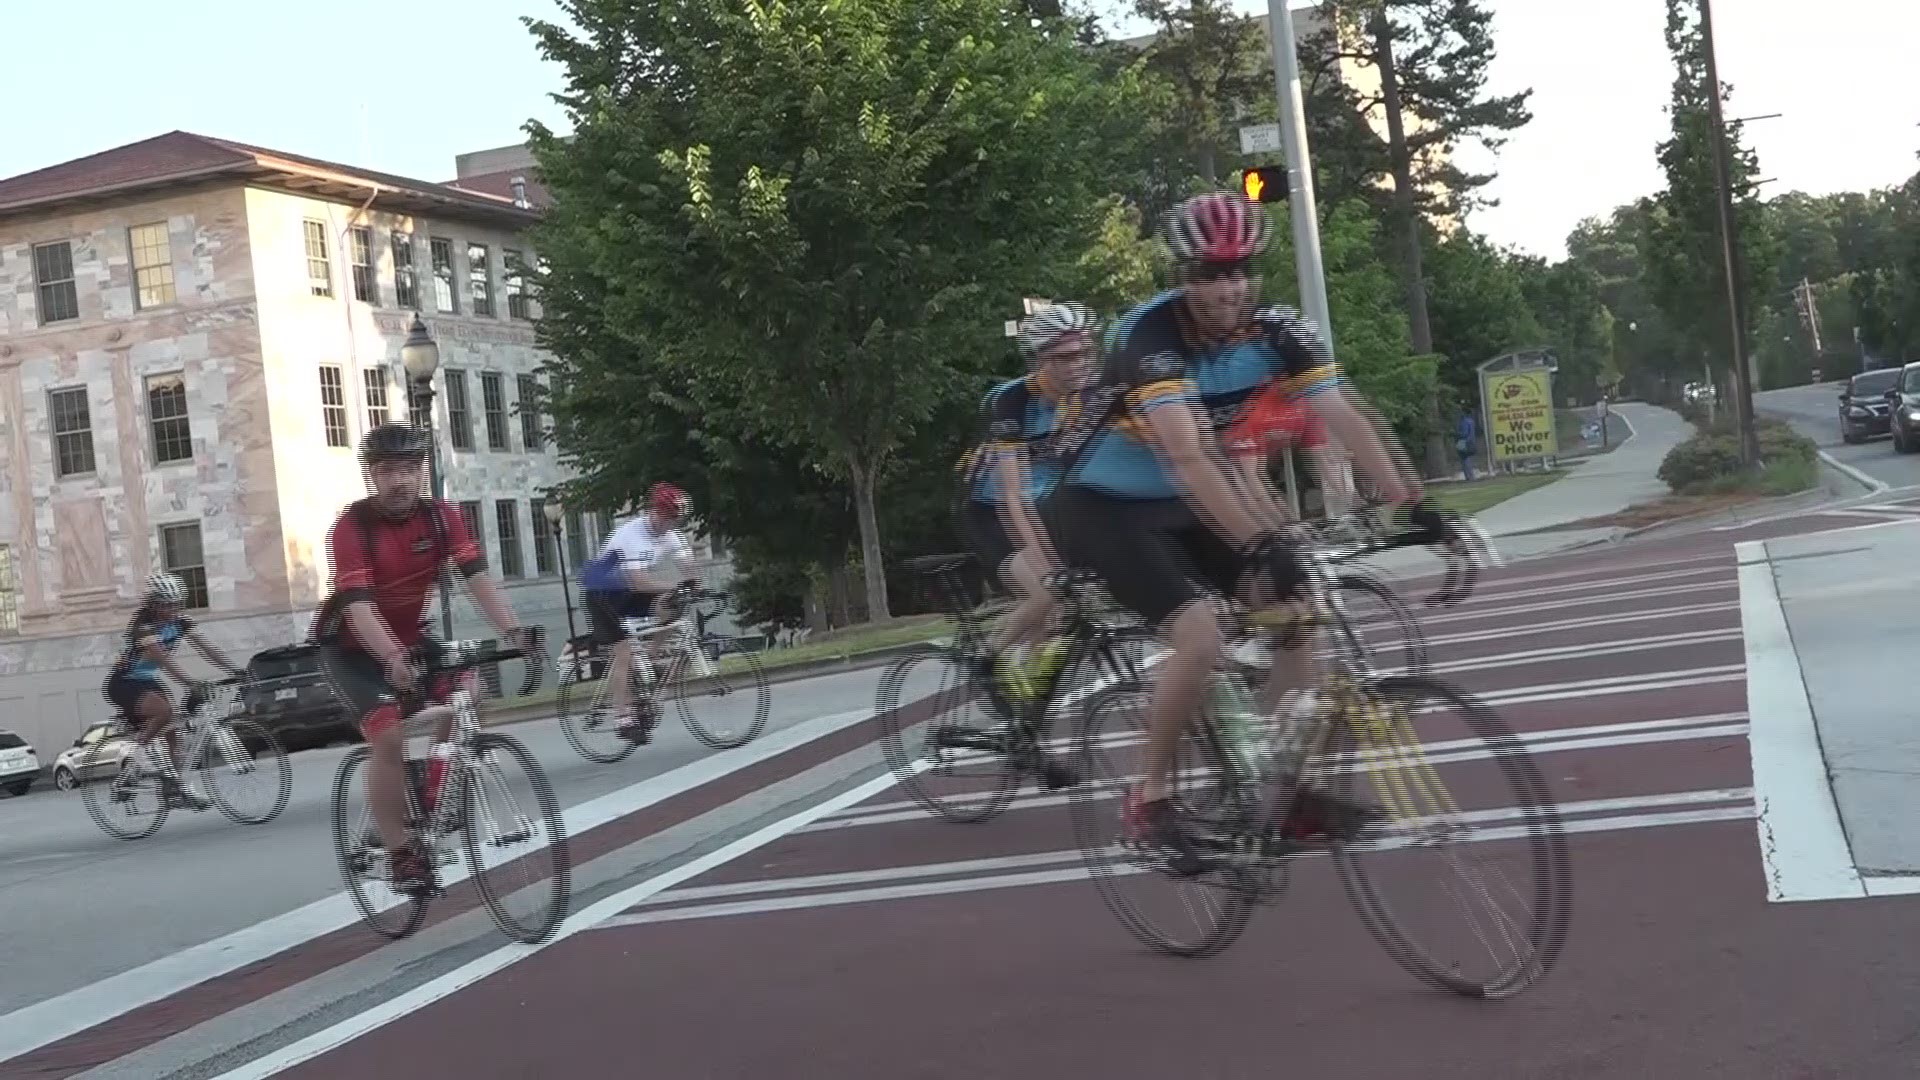 The 2-day, 200-mile bike ride that raises money for HIV/AIDS vaccine research